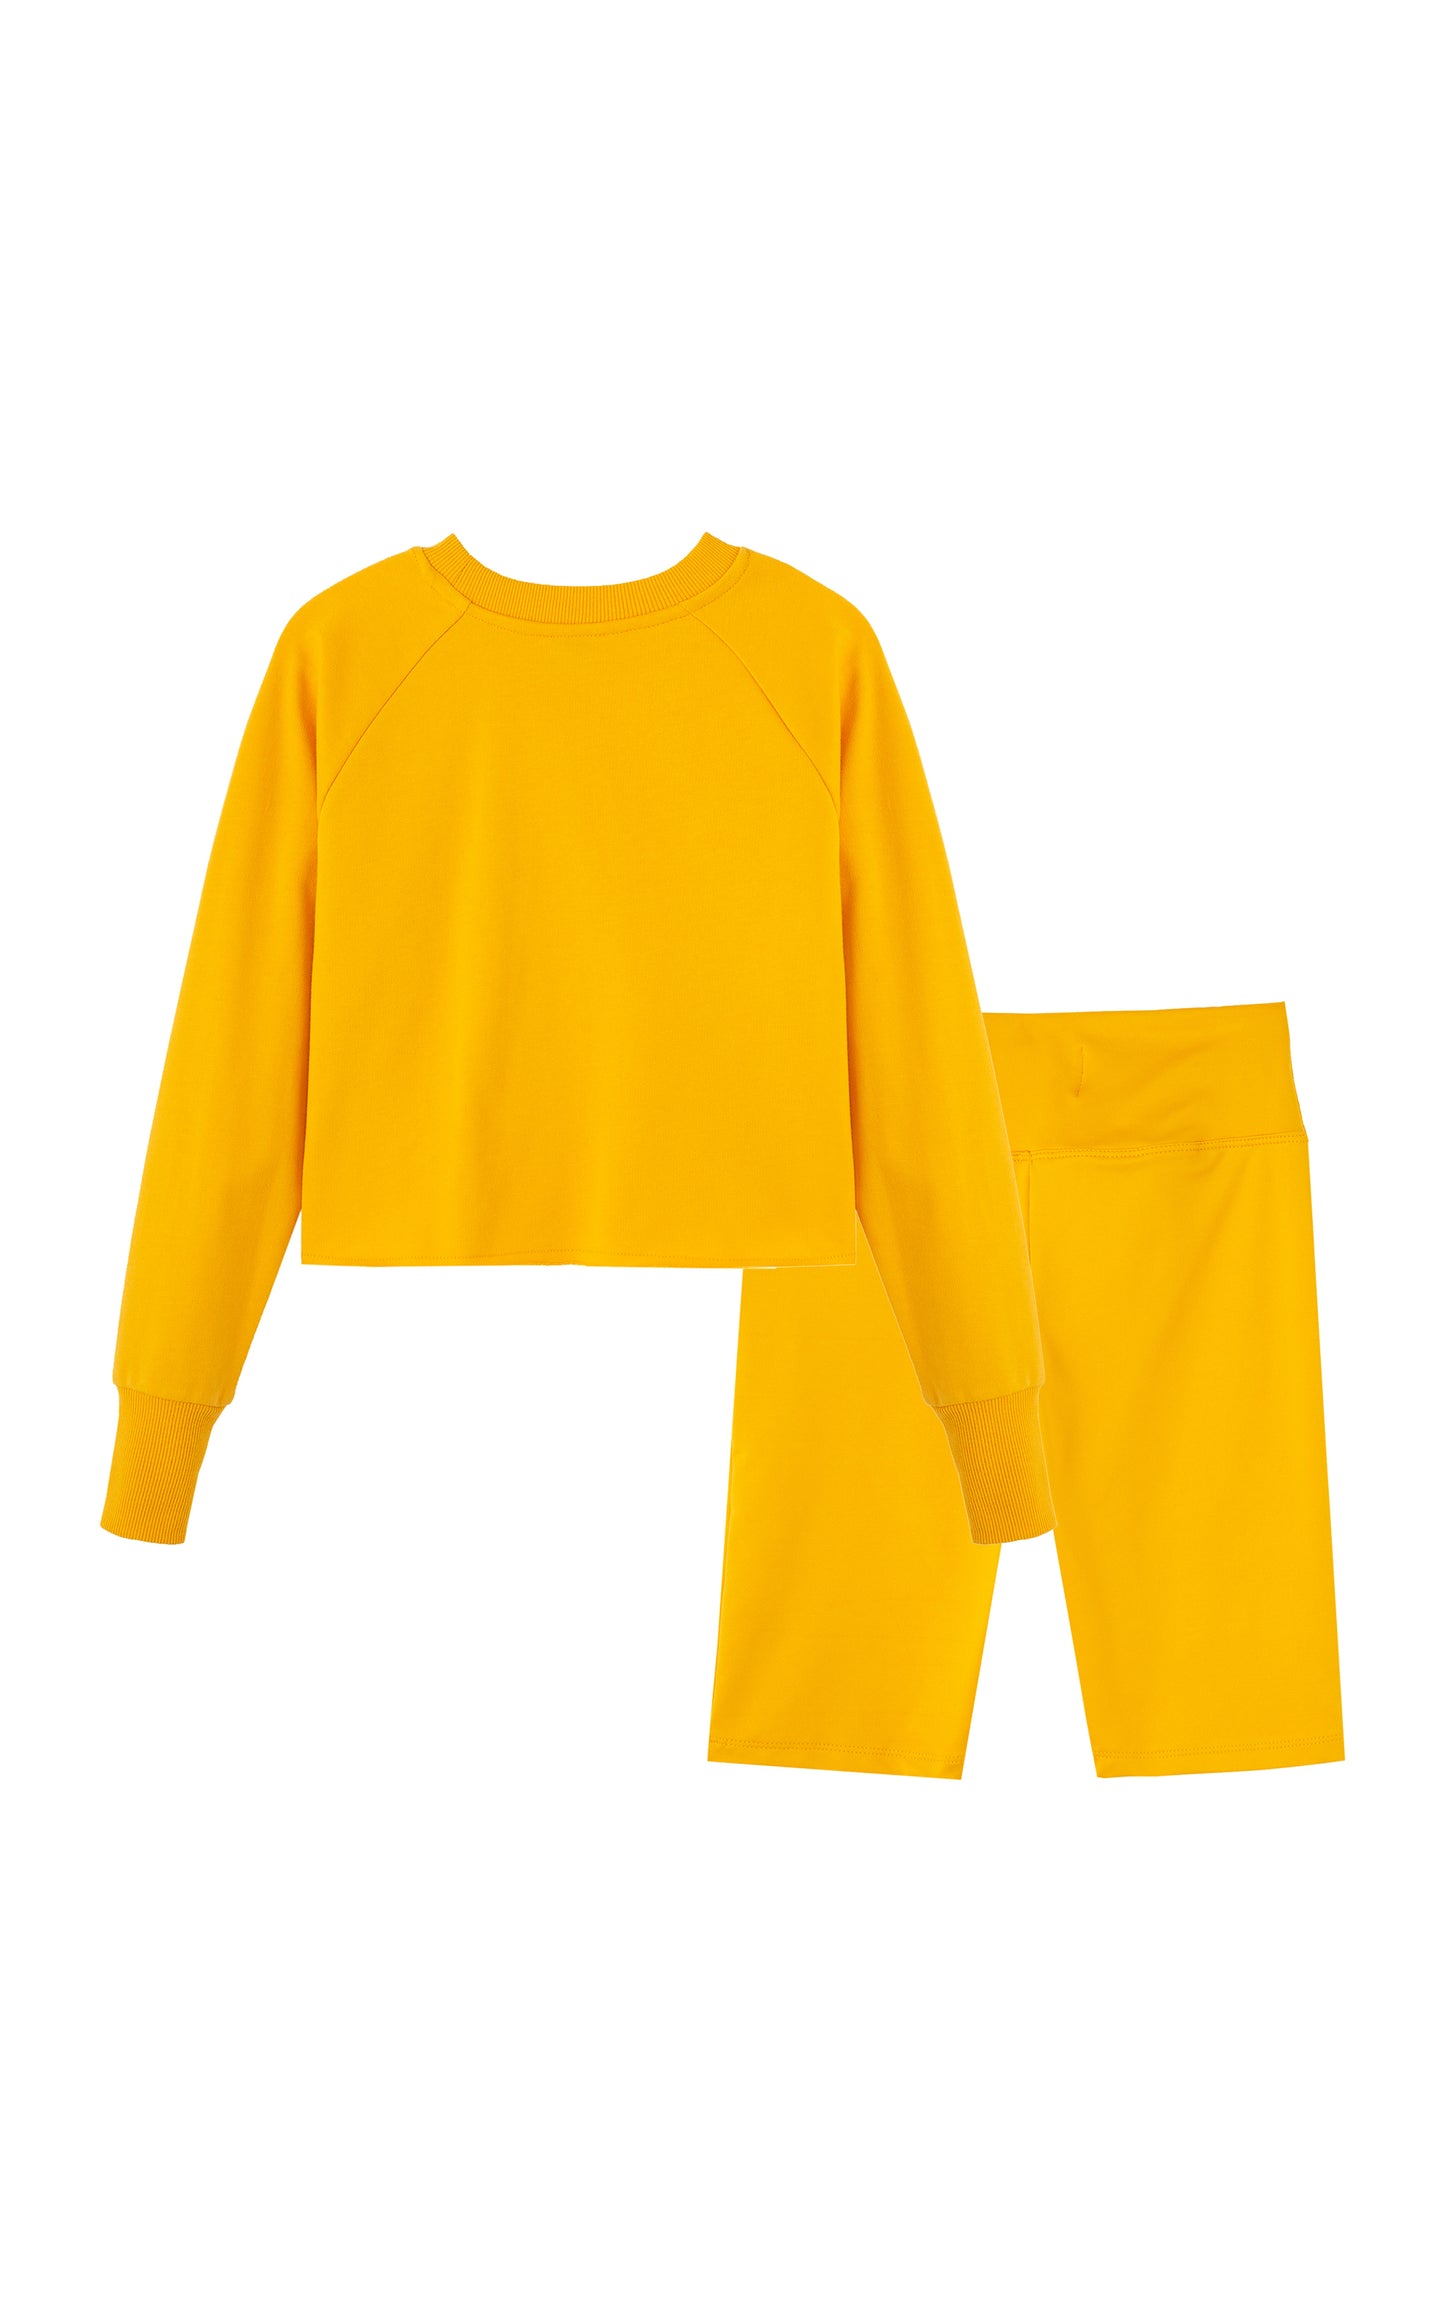 Back view of yellow long-sleeve, crewneck top with matching shorts.